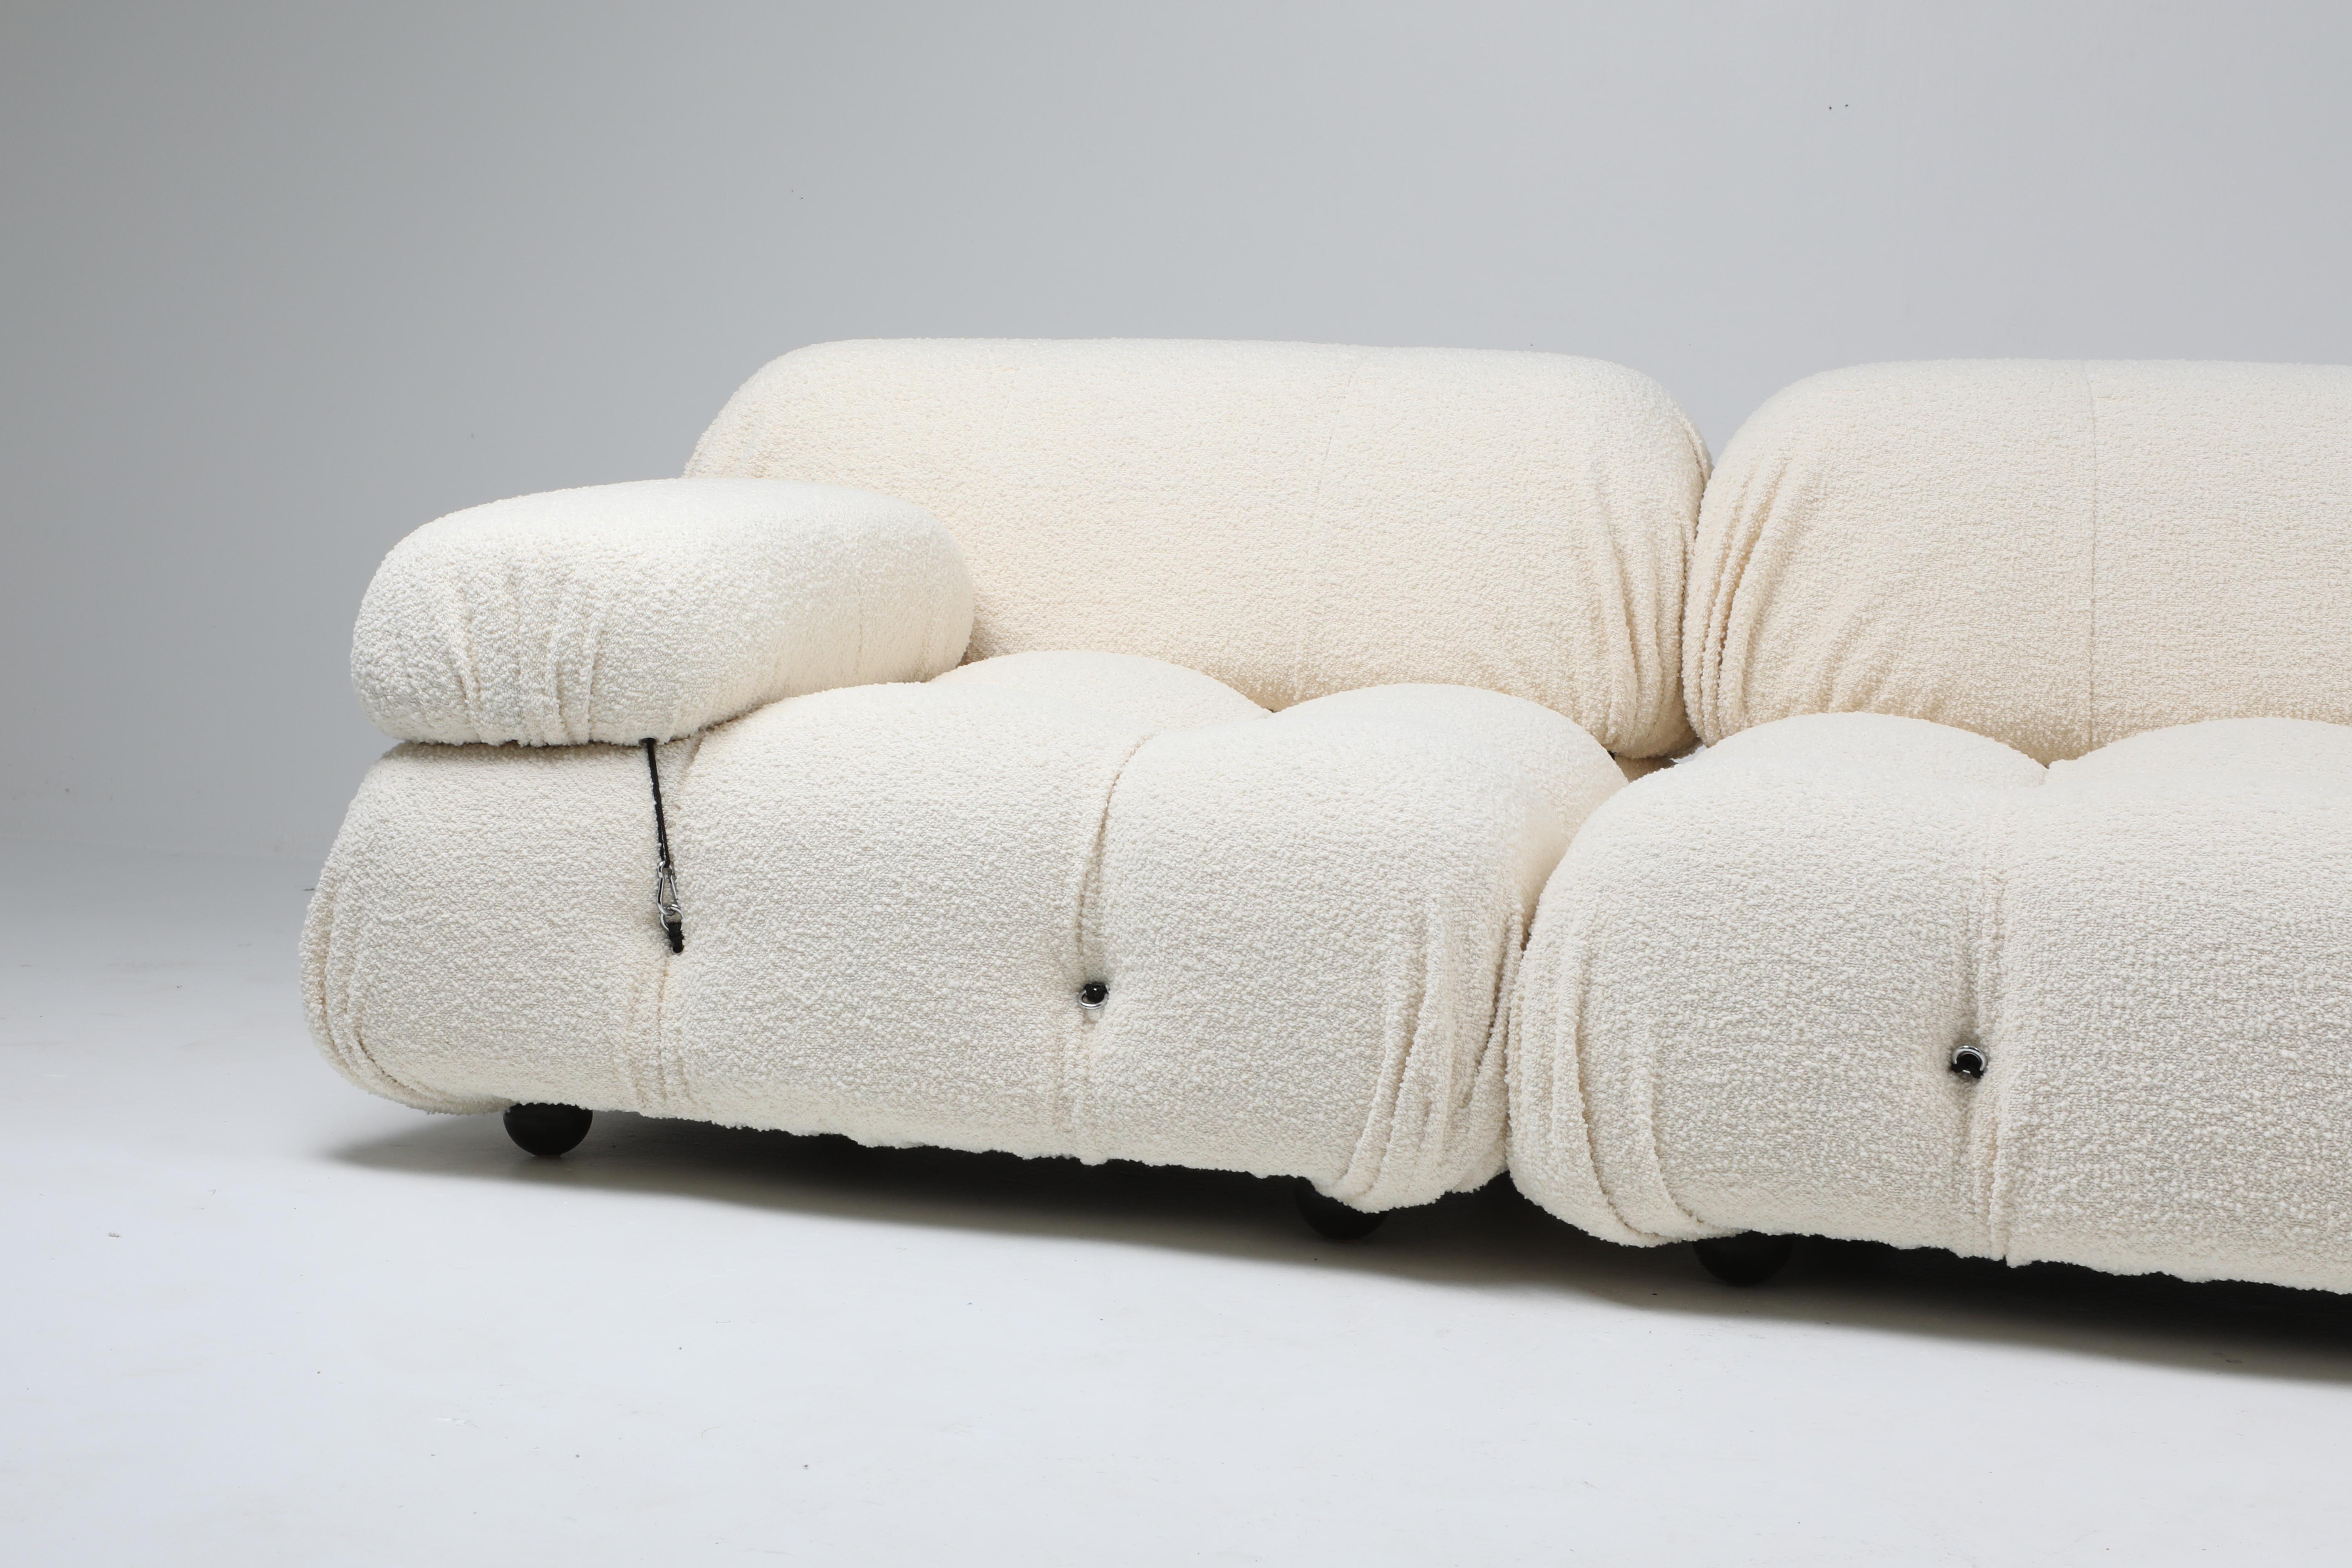 Post-Modern Camaleonda Sofa Set in Boucle Wool with Armrests by Mario Bellini, 1970's For Sale